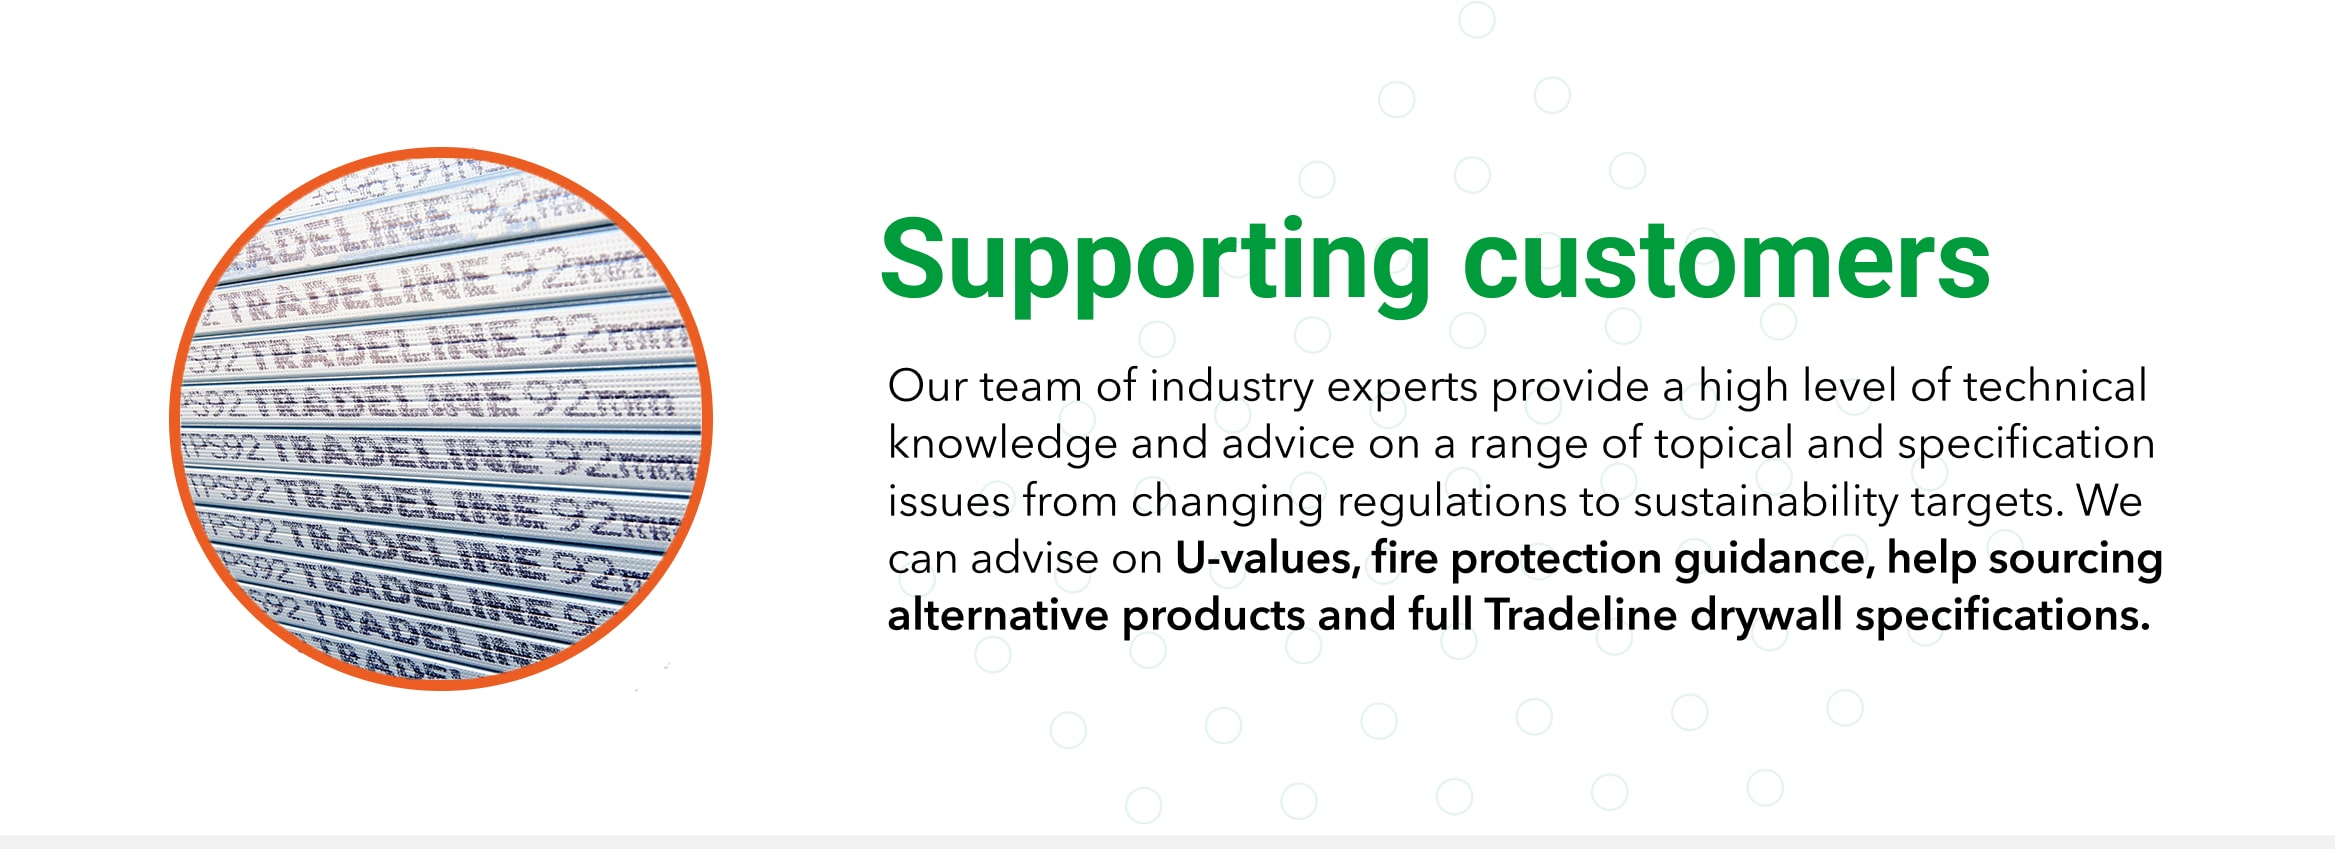 A round image of Tradeline products accompanied by information about CCF's expert customer support.